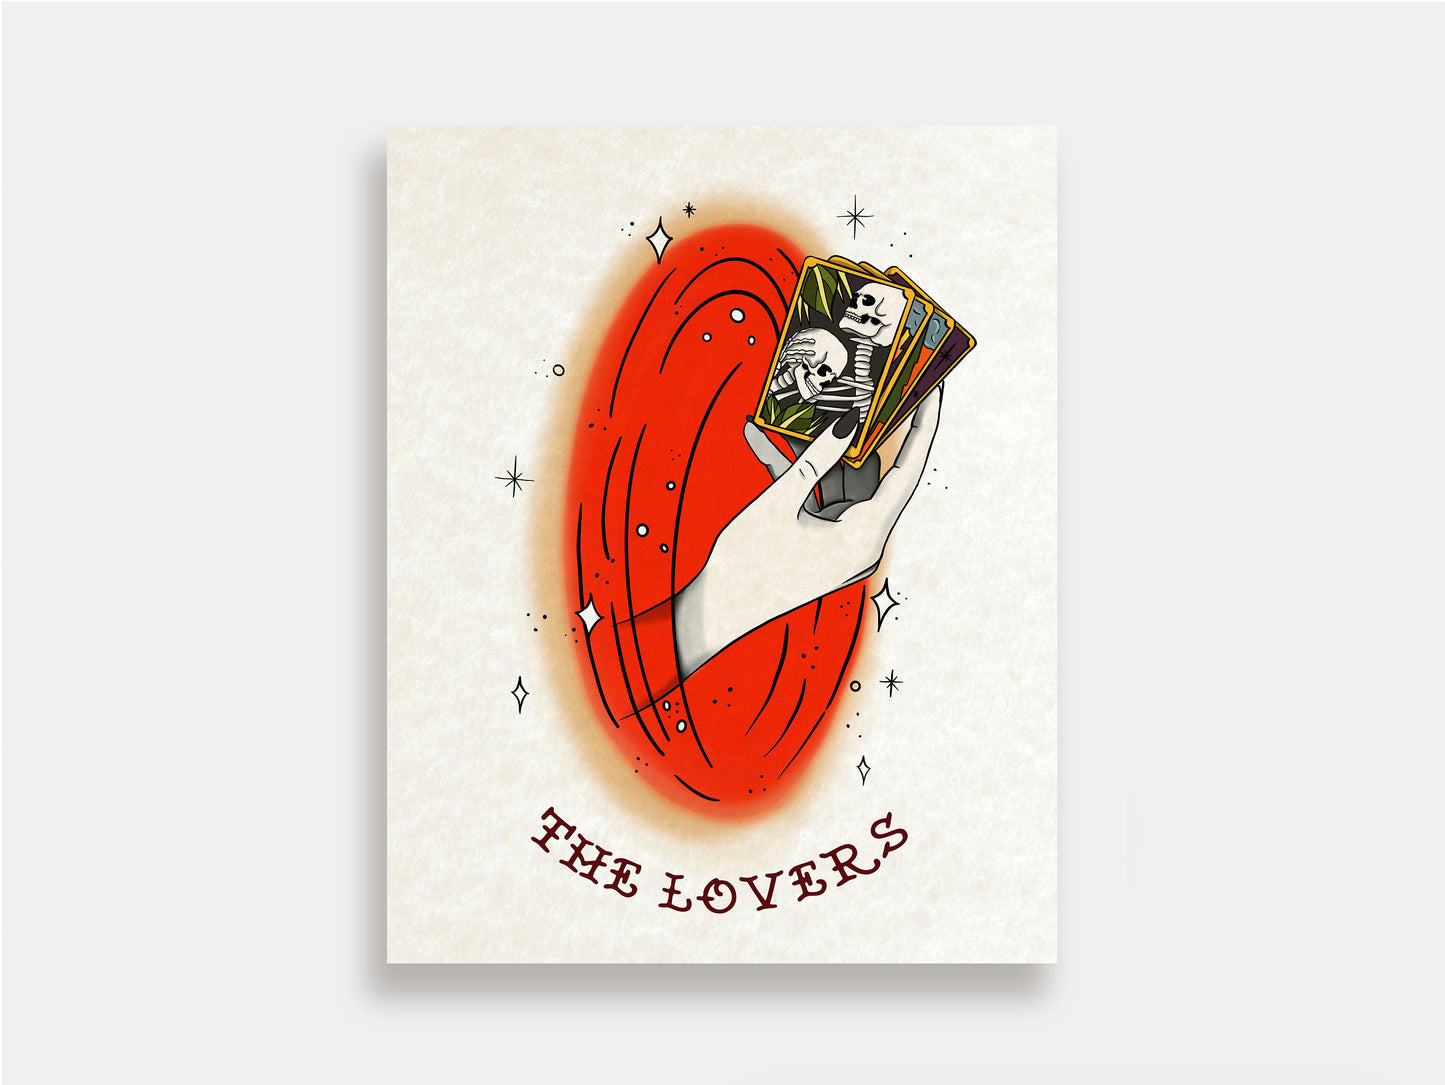 Tattoo Style Art Print - The Lovers